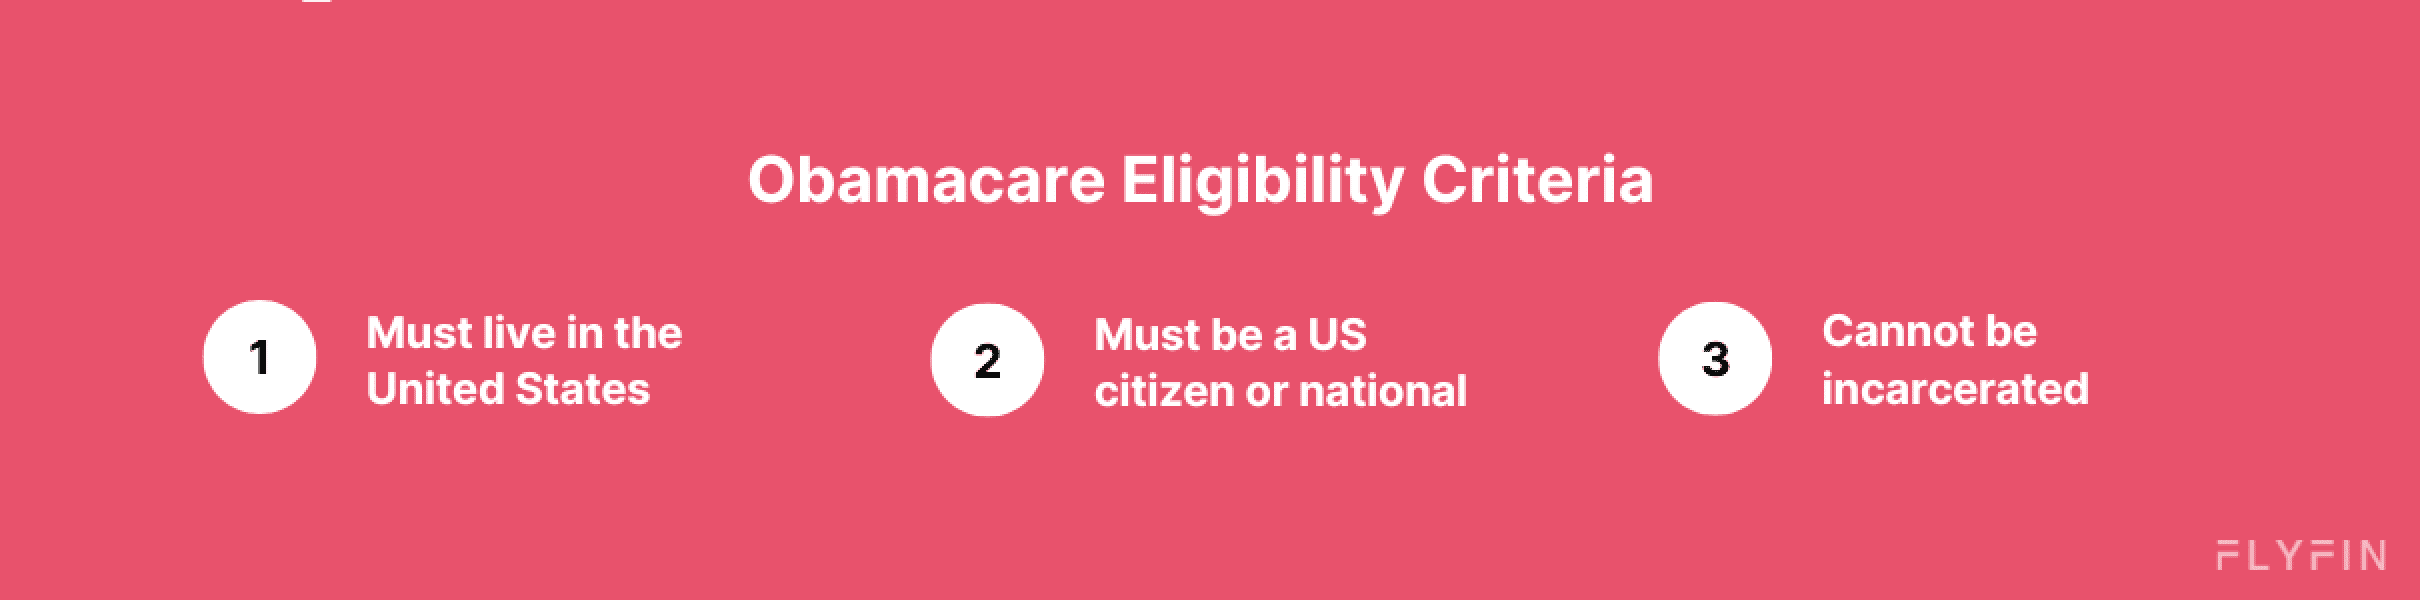 Image with text stating eligibility criteria for Obamacare in the United States. Must be a US citizen or national and cannot be incarcerated.